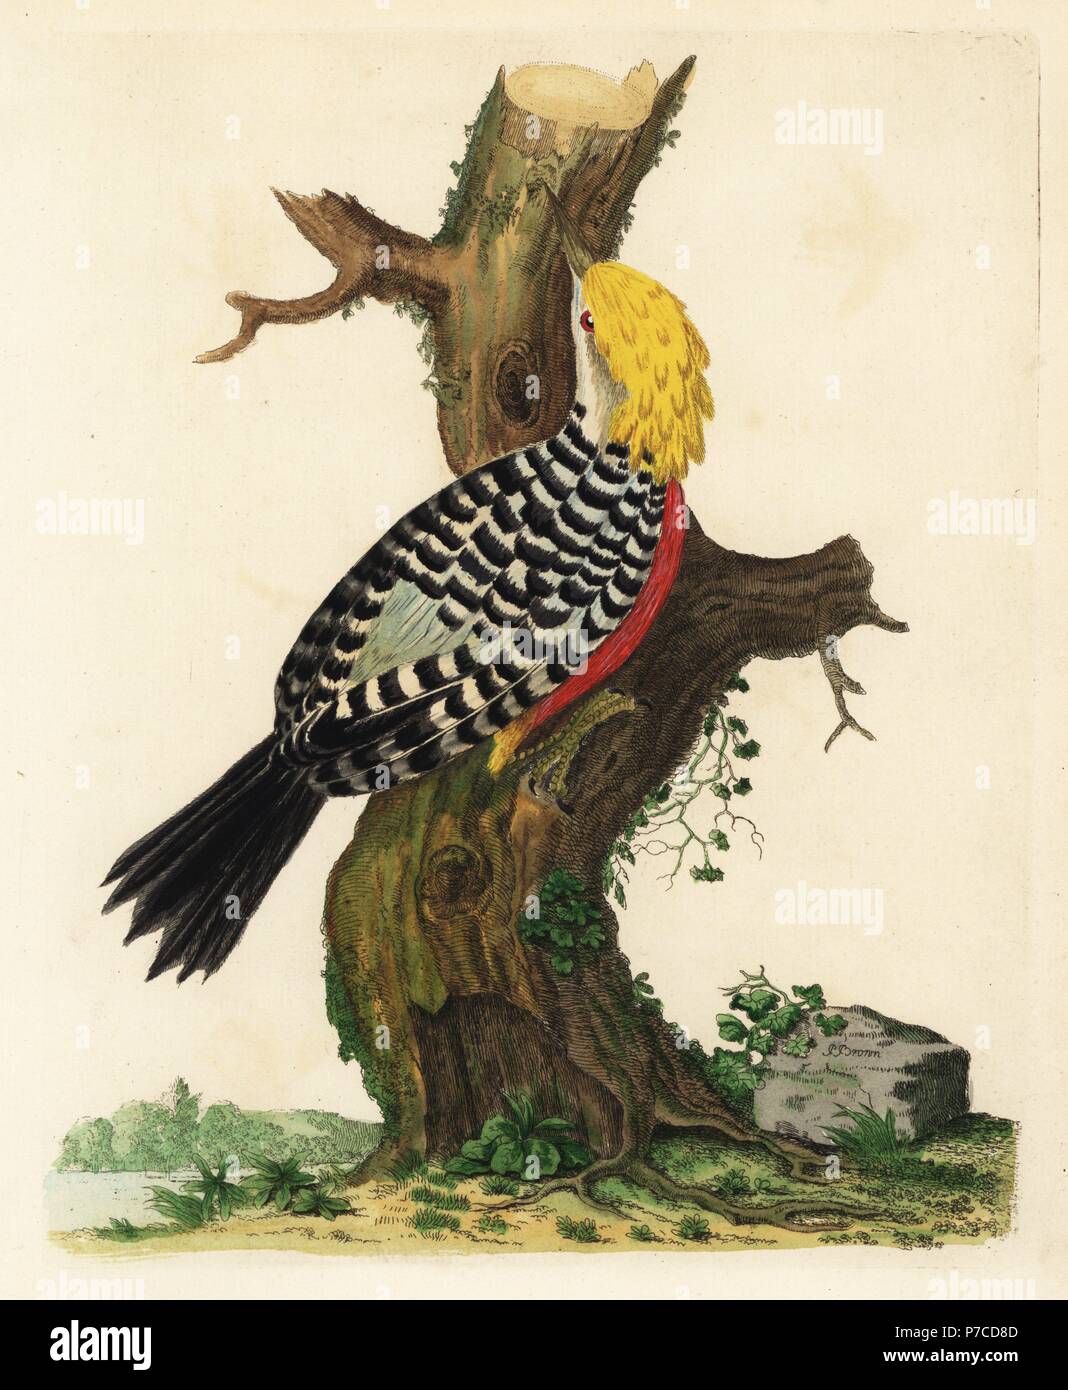 Blond-crested woodpecker, Celeus flavescens (Yellow-crested woodpecker, Picus flavescens). From a specimen in the possession of Thomas Pennant. Handcoloured copperplate engraving by Peter Brown from his New Illustrations of Zoology, B. White, London, 1776. Stock Photo